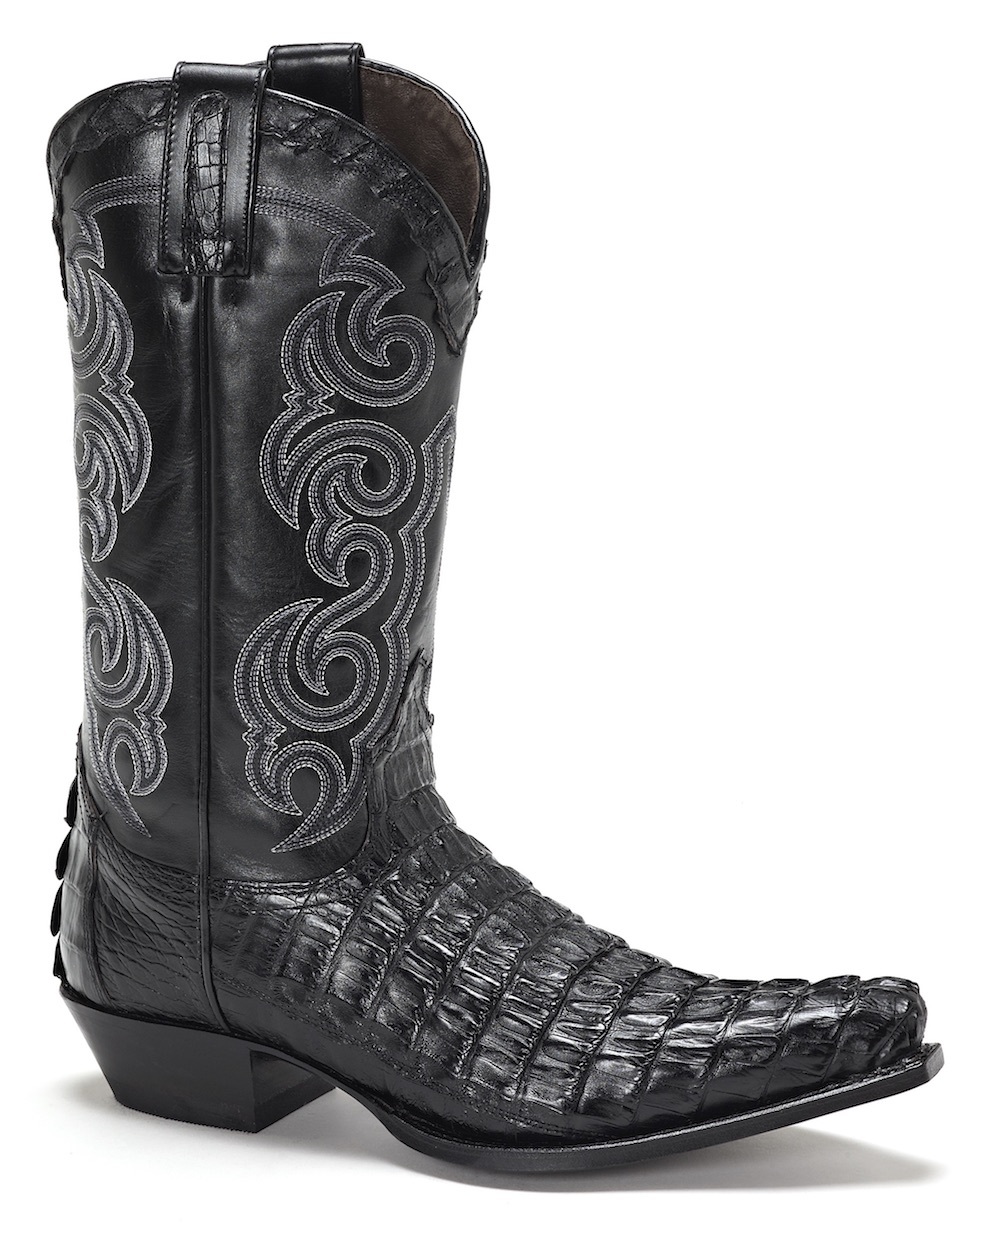 Buy > basic cowboy boots > in stock